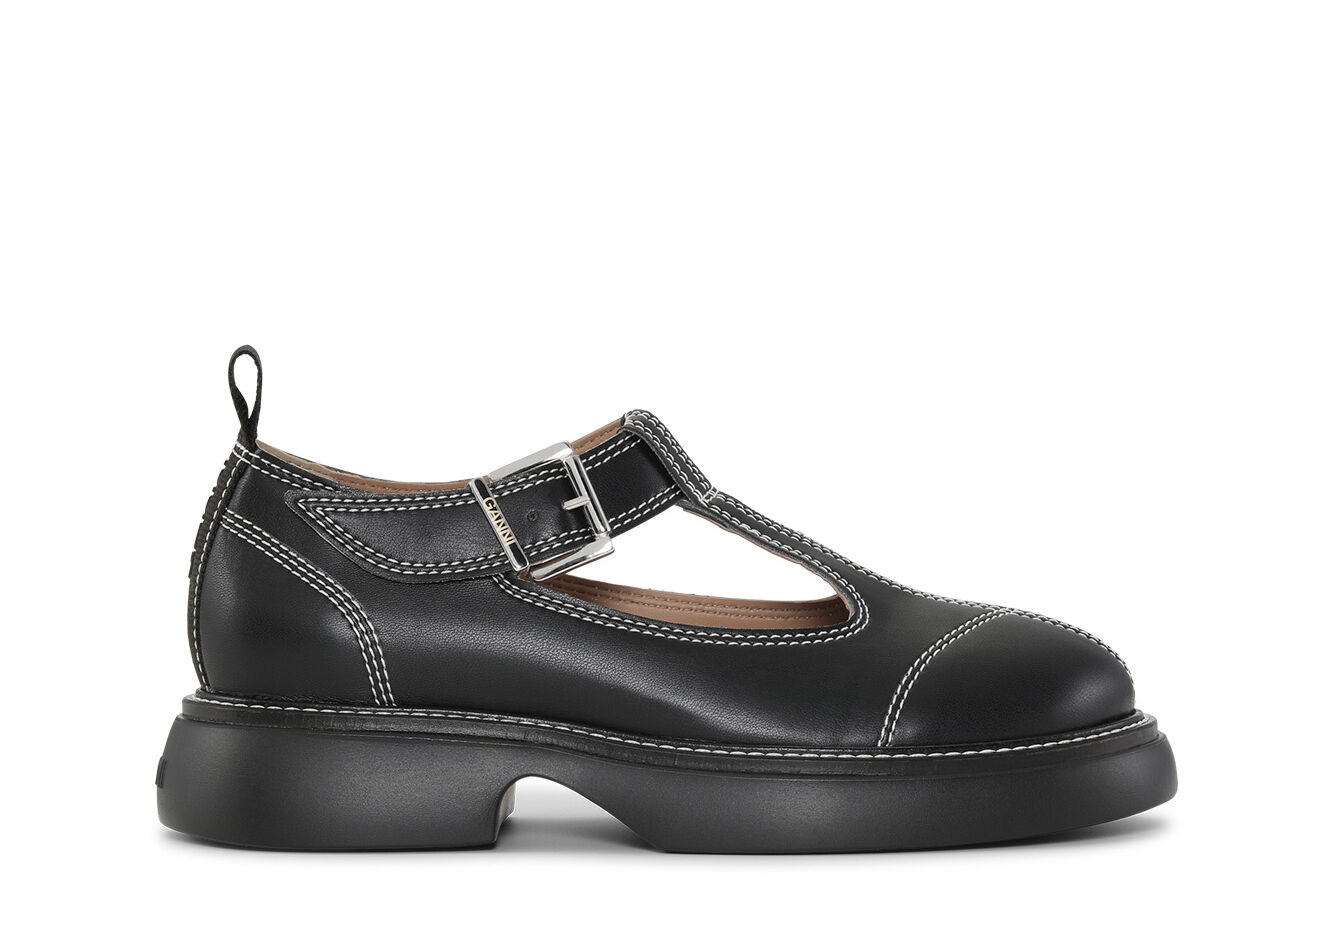 Black/White Everyday Buckle Mary Jane Shoes, Cotton, in colour Black - 1 - GANNI